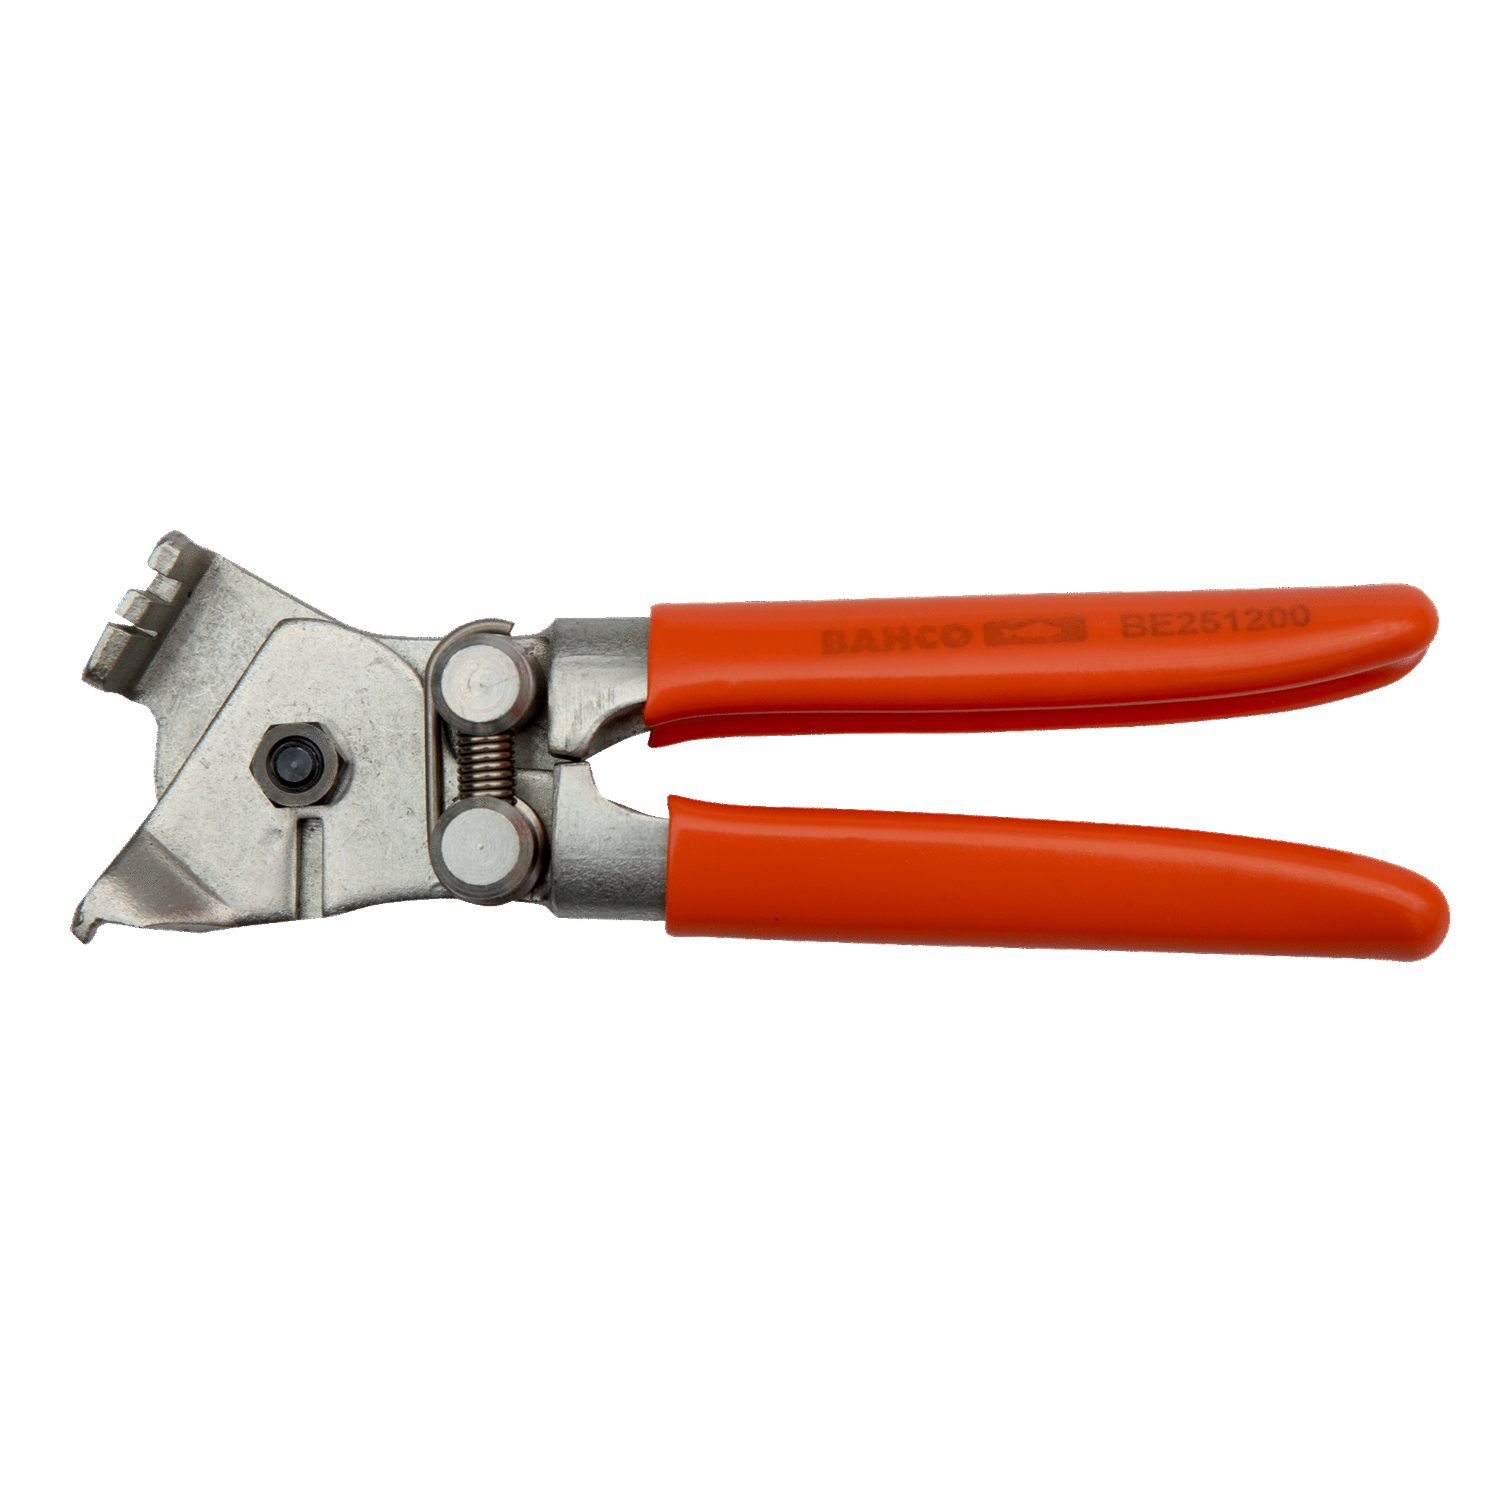 BAHCO BE251200 Stainless Steel Strap Plier (BAHCO Tools) - Premium Stainless Steel Strap Plier from BAHCO - Shop now at Yew Aik.